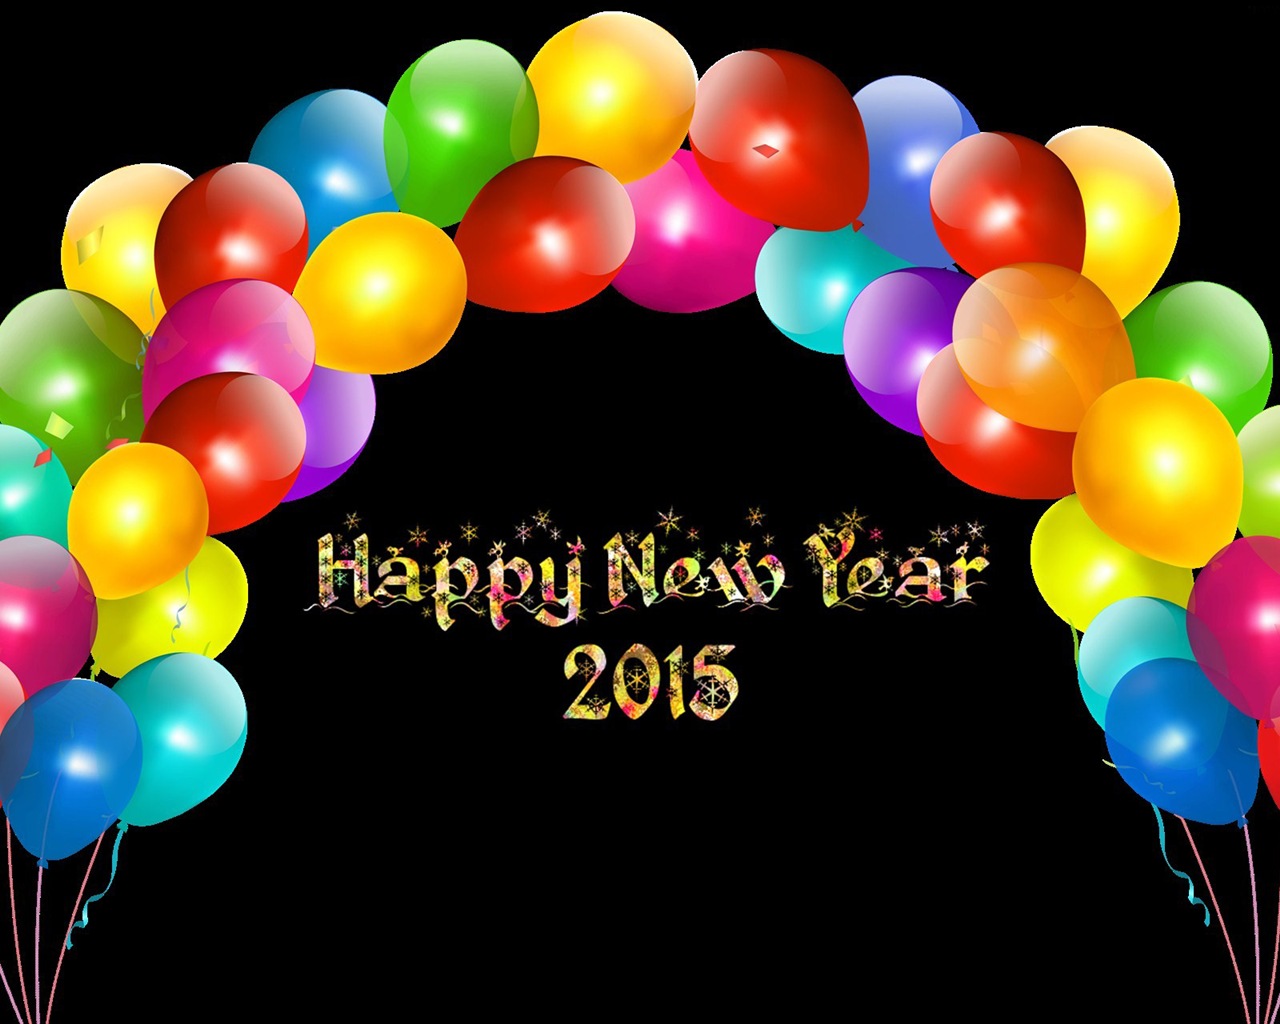 2015 New Year theme HD wallpapers (2) #6 - 1280x1024